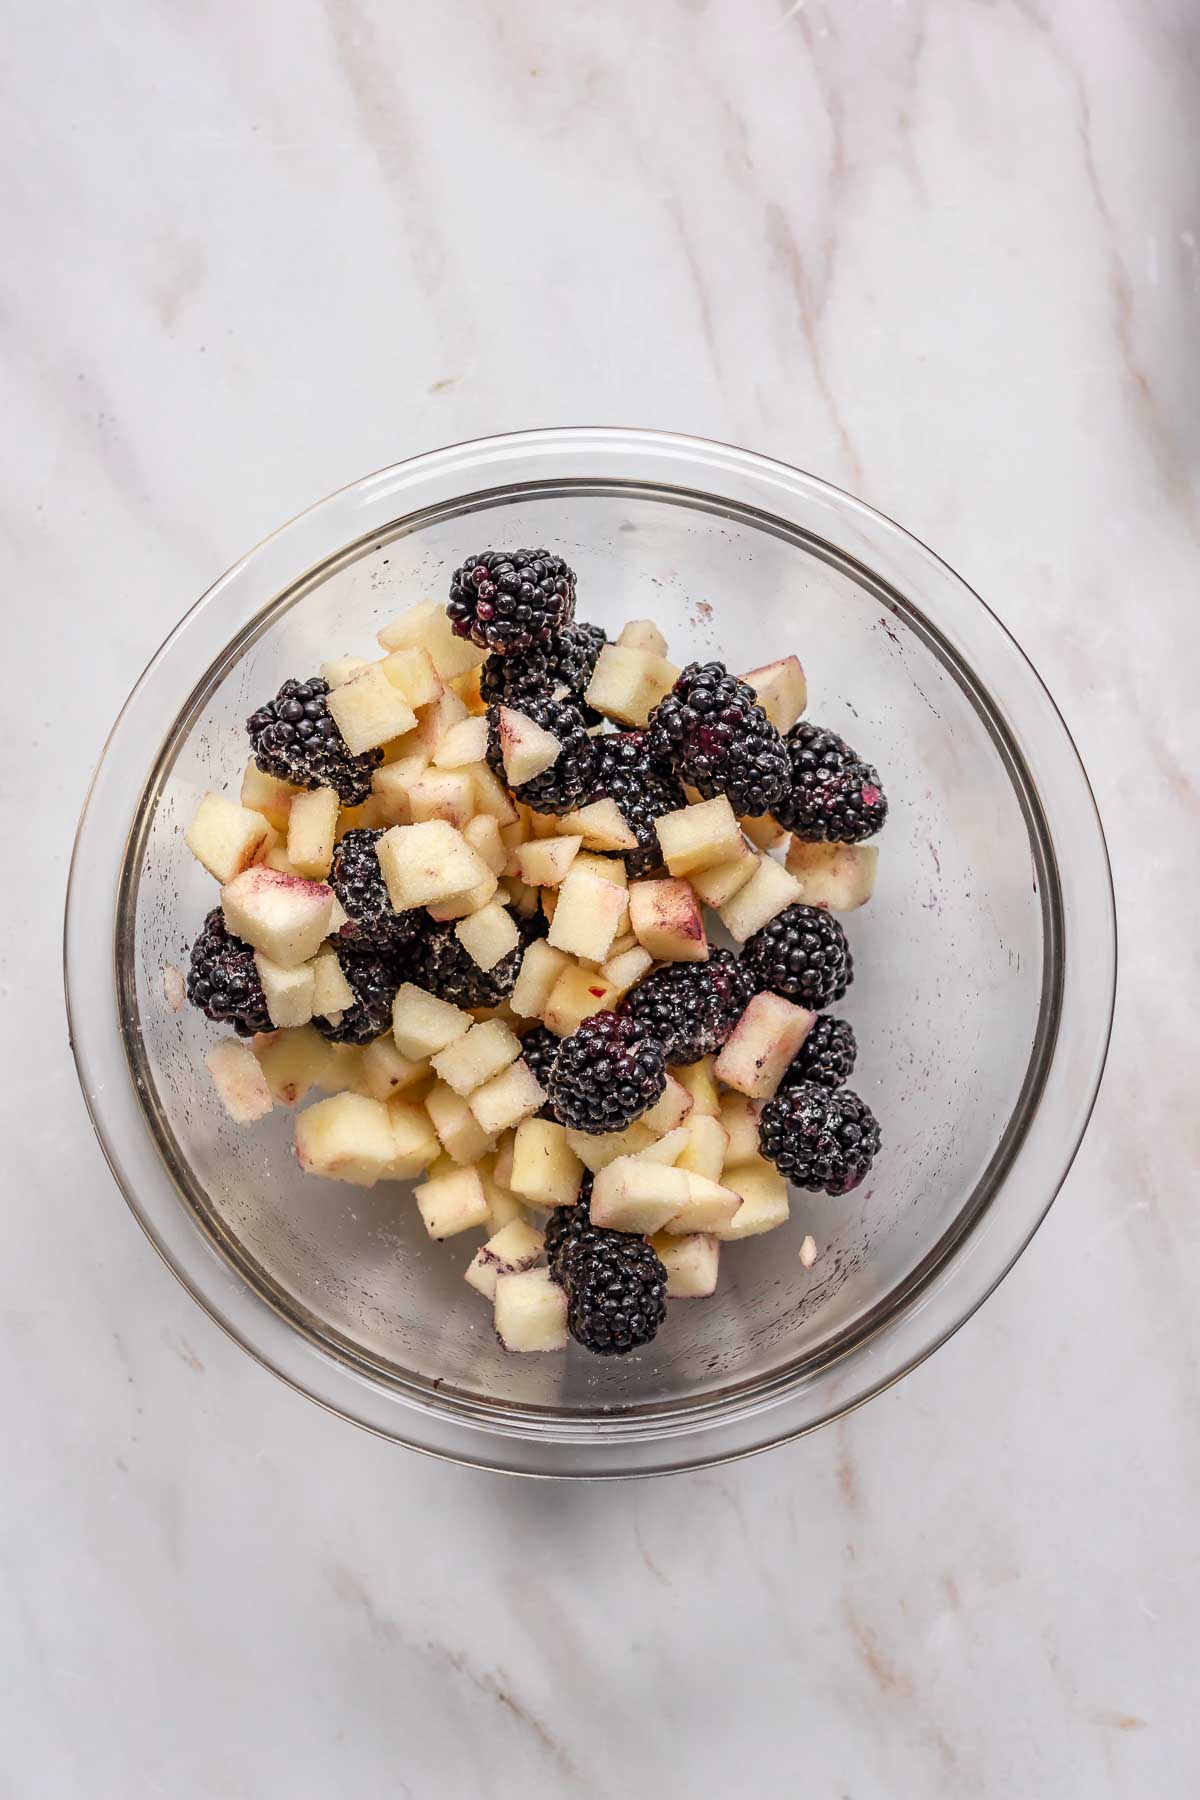 Blackberries and apples in a mixing bowl.